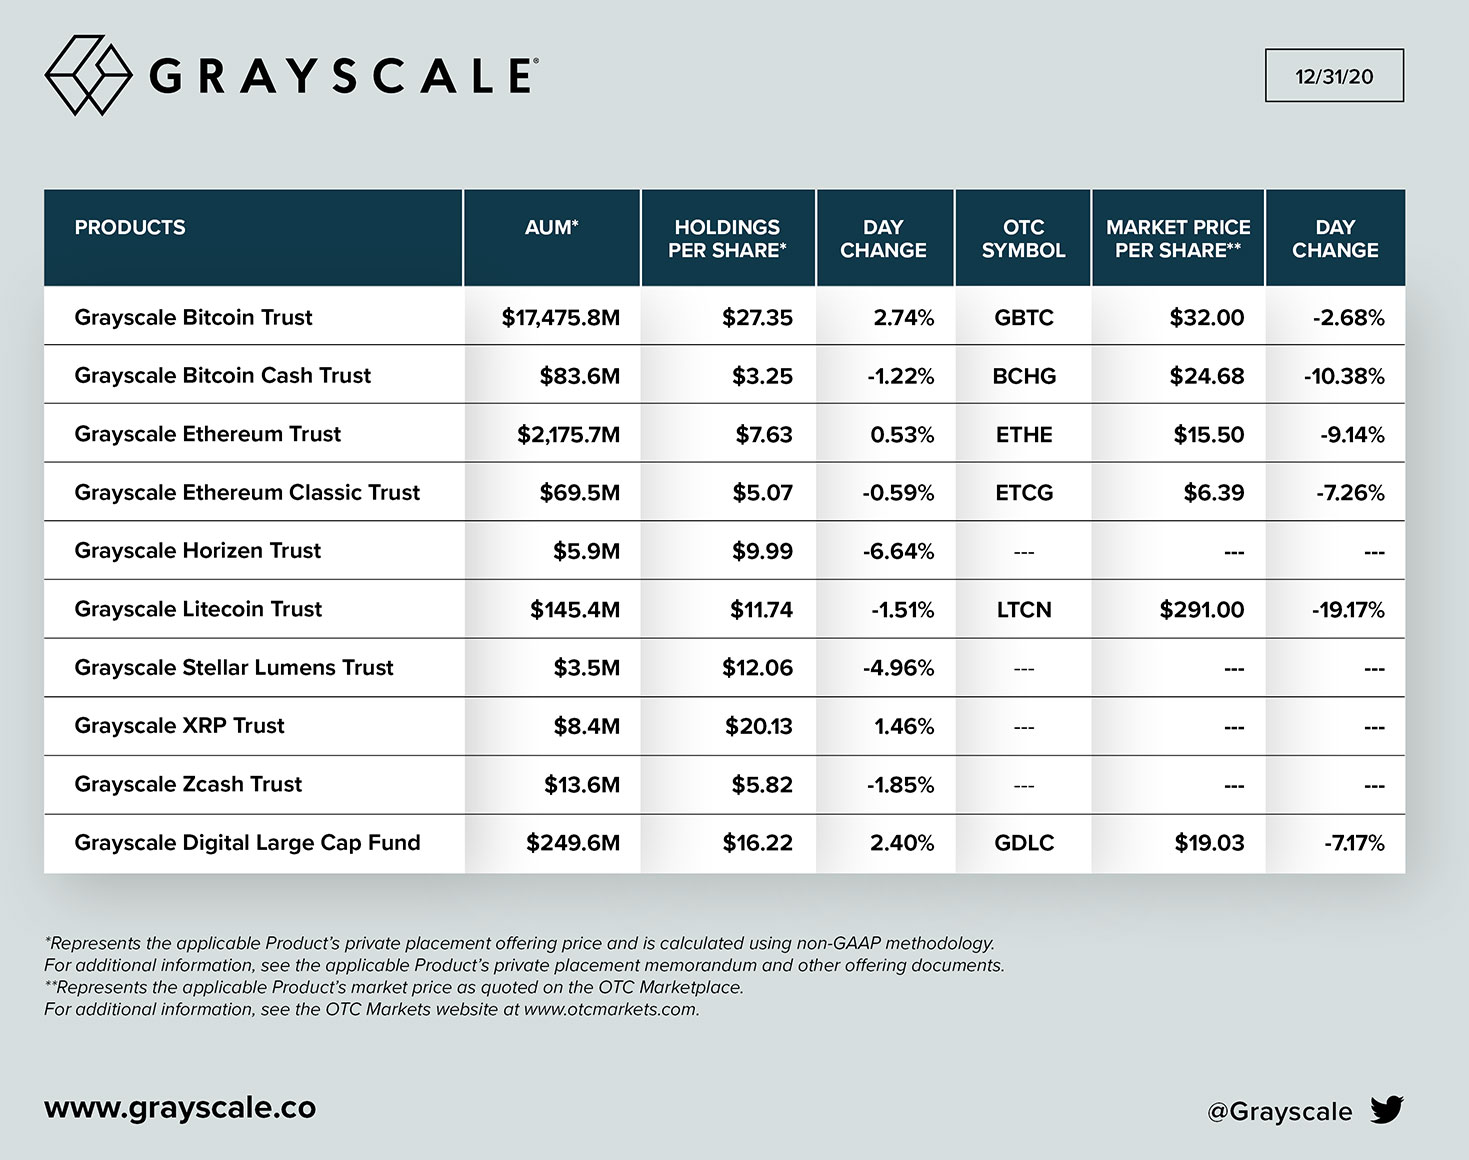 Grayscale Gesamtes Krypto Investment Ende 2020